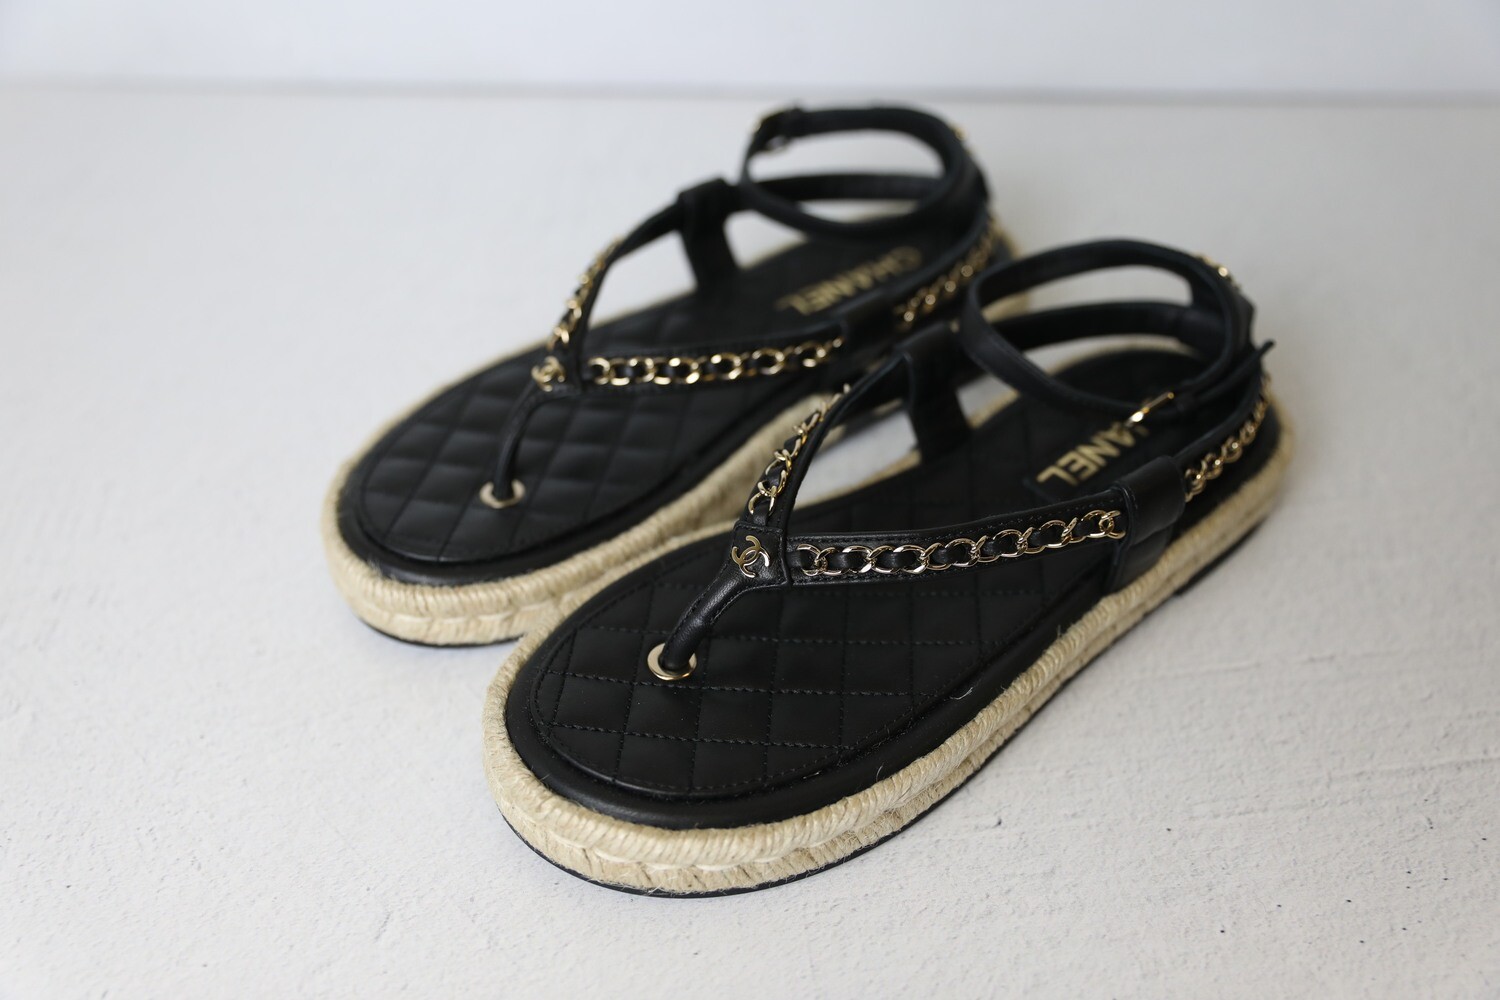 Chanel Chain Thong Sandals with Ankle Strap, Black with Gold Hardware, Size  40, New in Box WA001